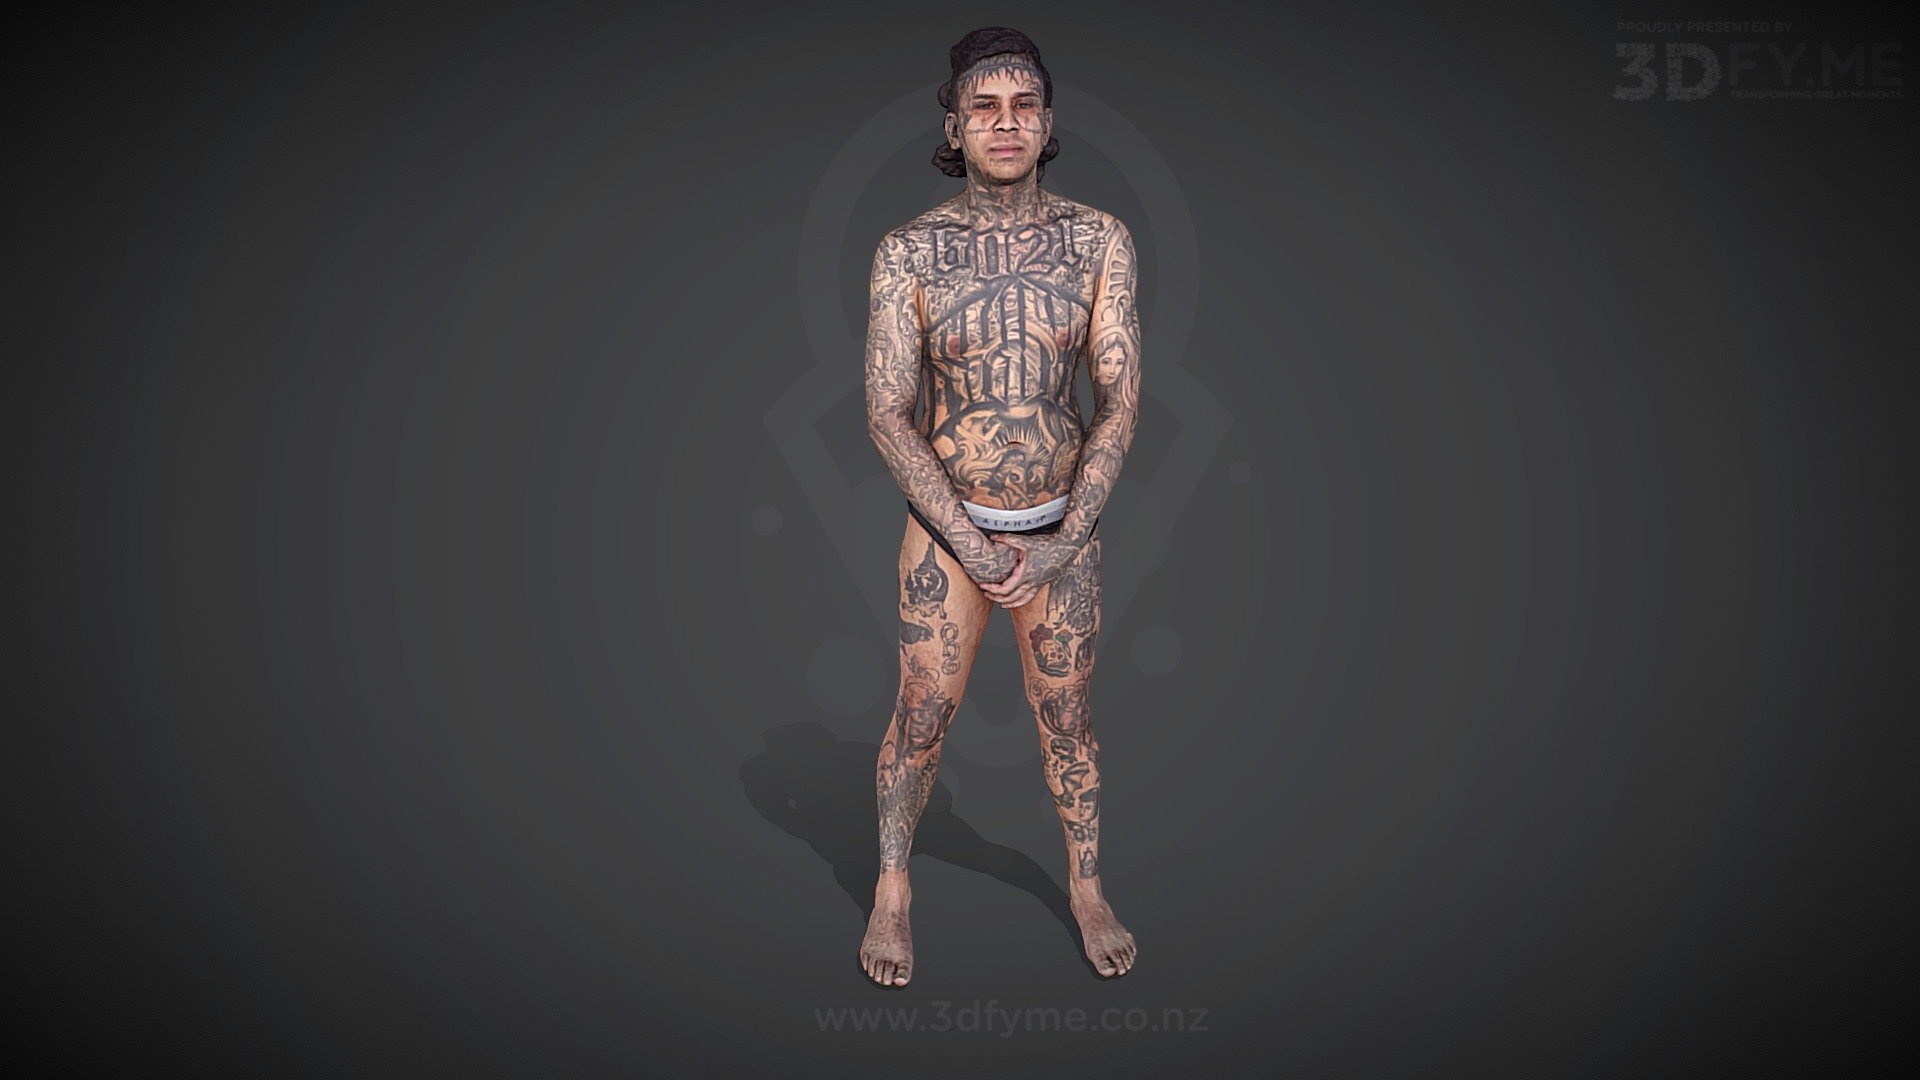 Photogrammetry raw scan, 140 pics (8 MP), decimated, texture re-projected (raw diffuse map, 8k) - Brendan, Wellington Tattoo Convention 2021 - 3D model by 3Dfy.me New Zealand (@smacher2016) 3d model